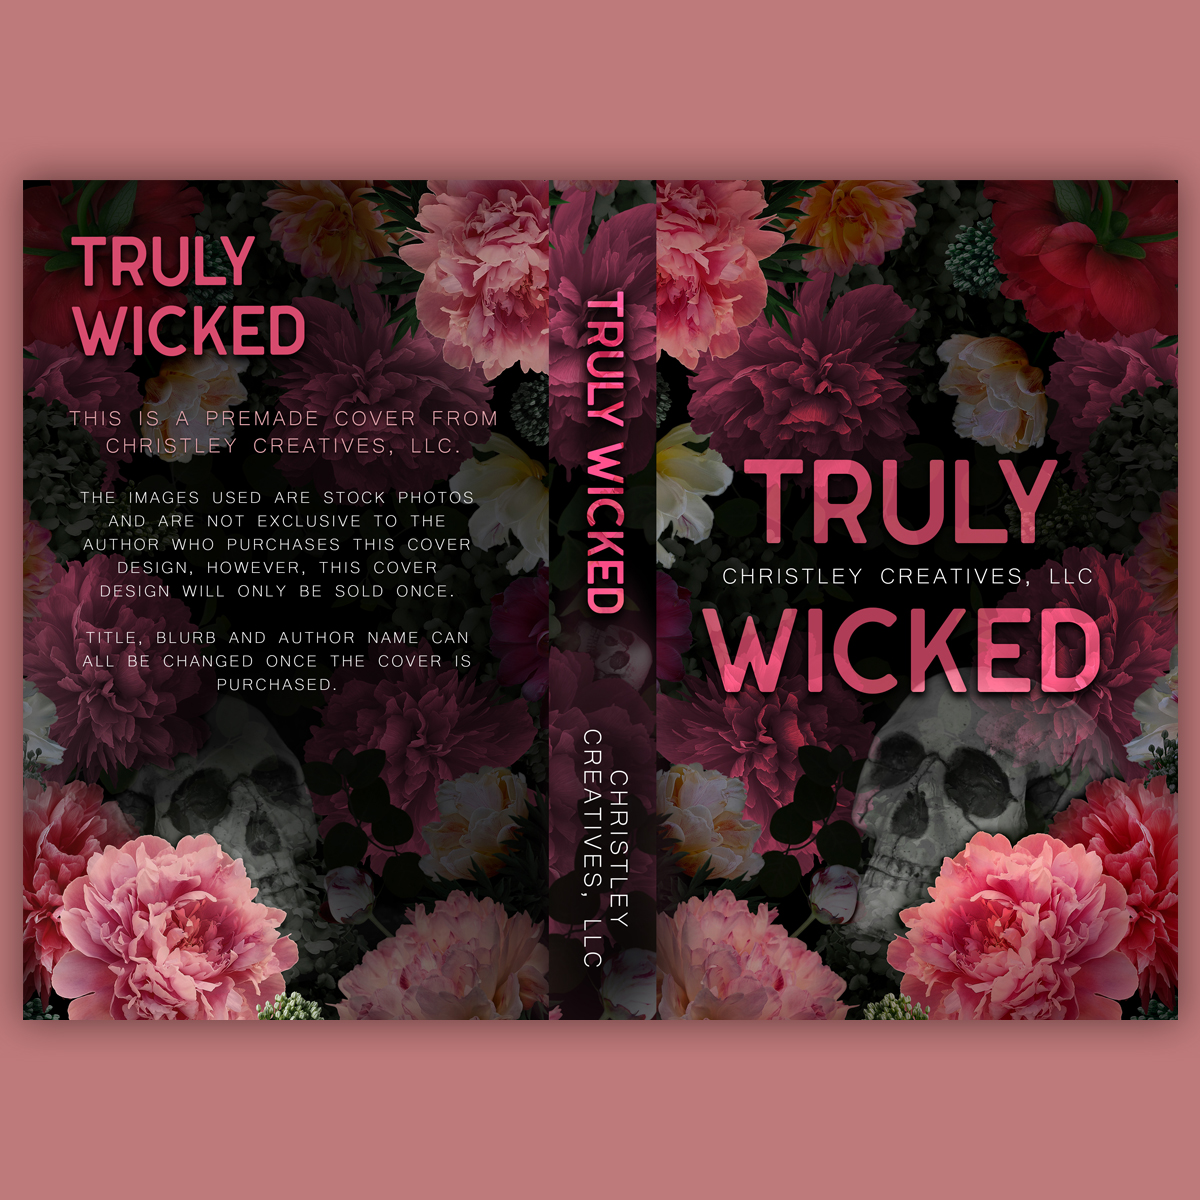 Truly Wicked - Premade Contemporary Dark Romance Book Cover from Christley Creatives